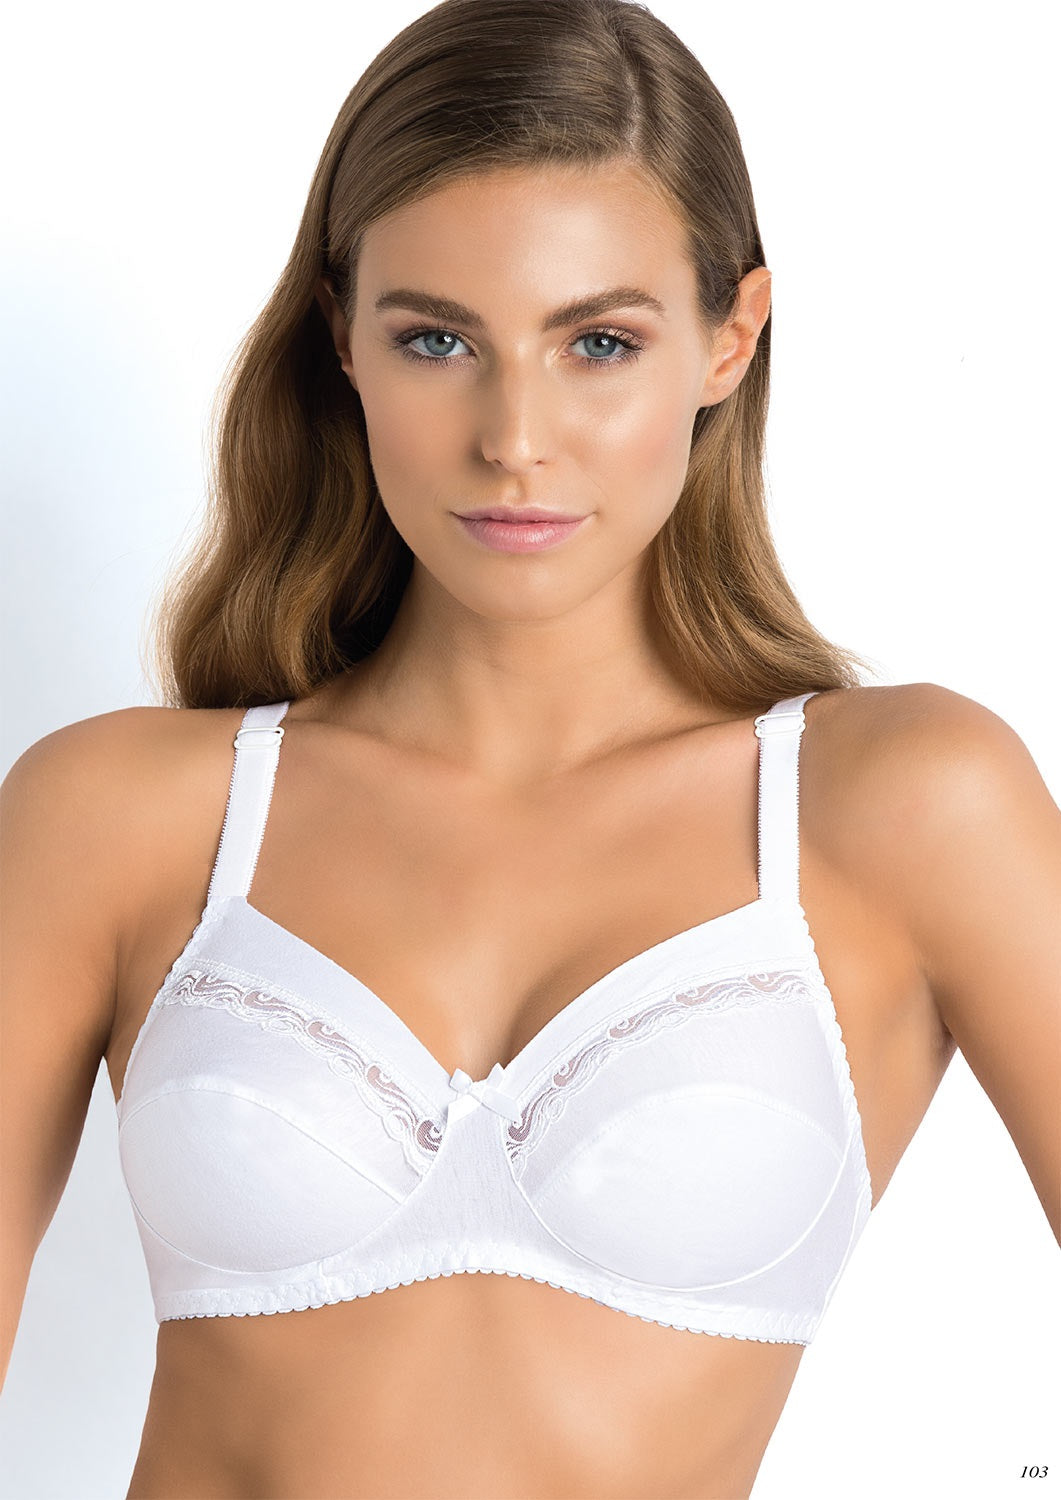 Italian (IT) Bra Sizes in Centimeters and Inches